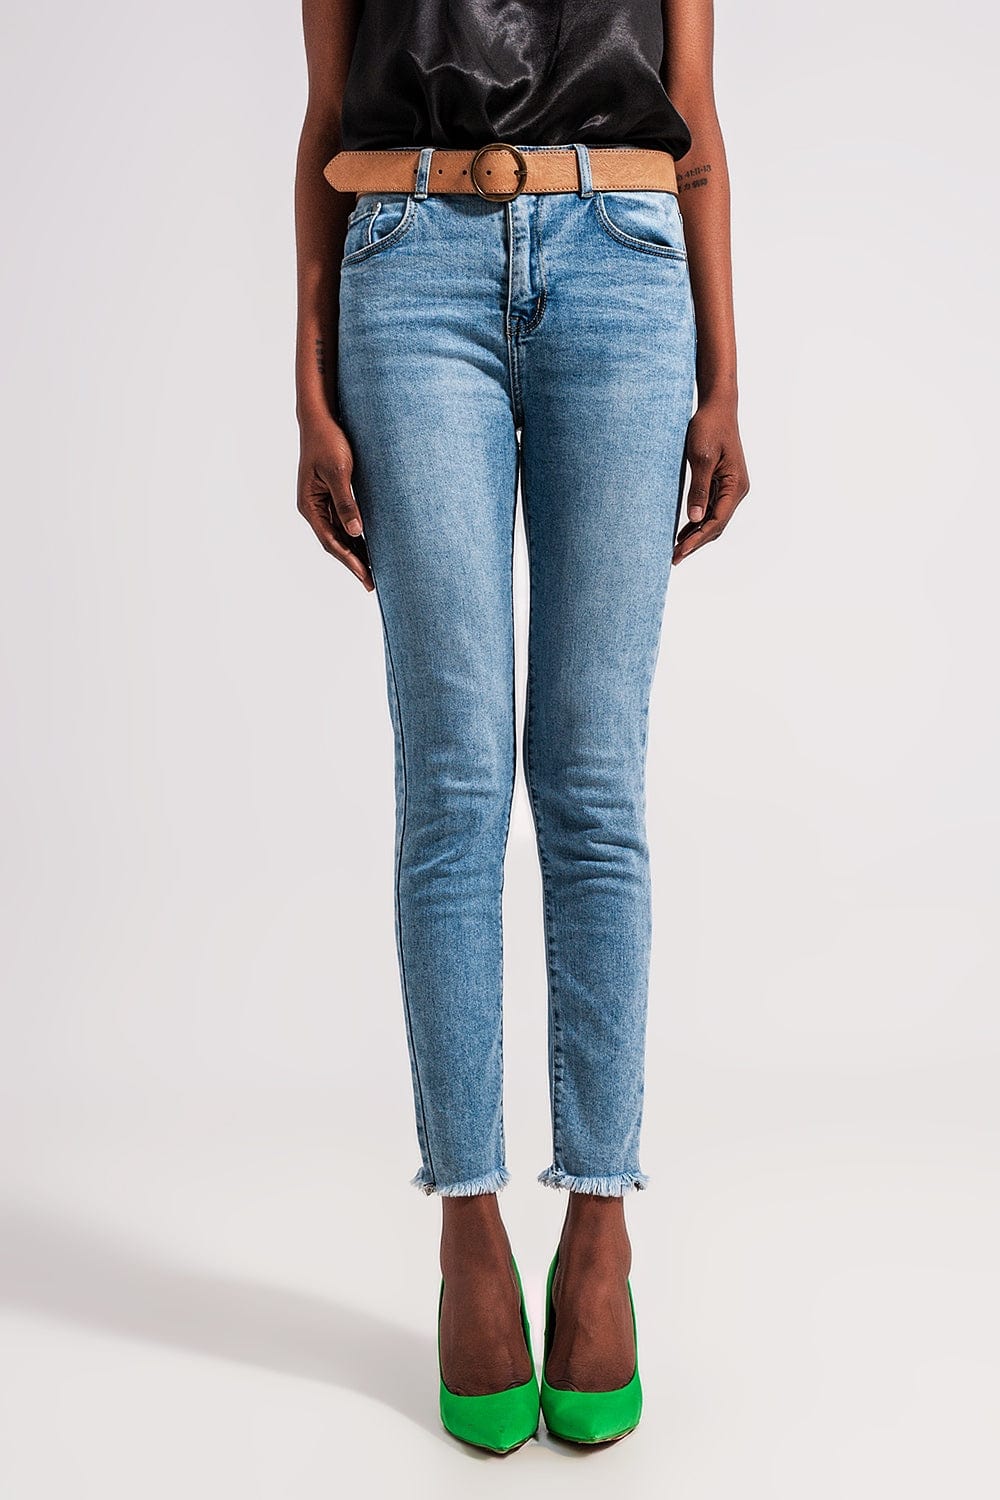 Q2 Women's Jean Jeans with Frayed Hem in Light Blue